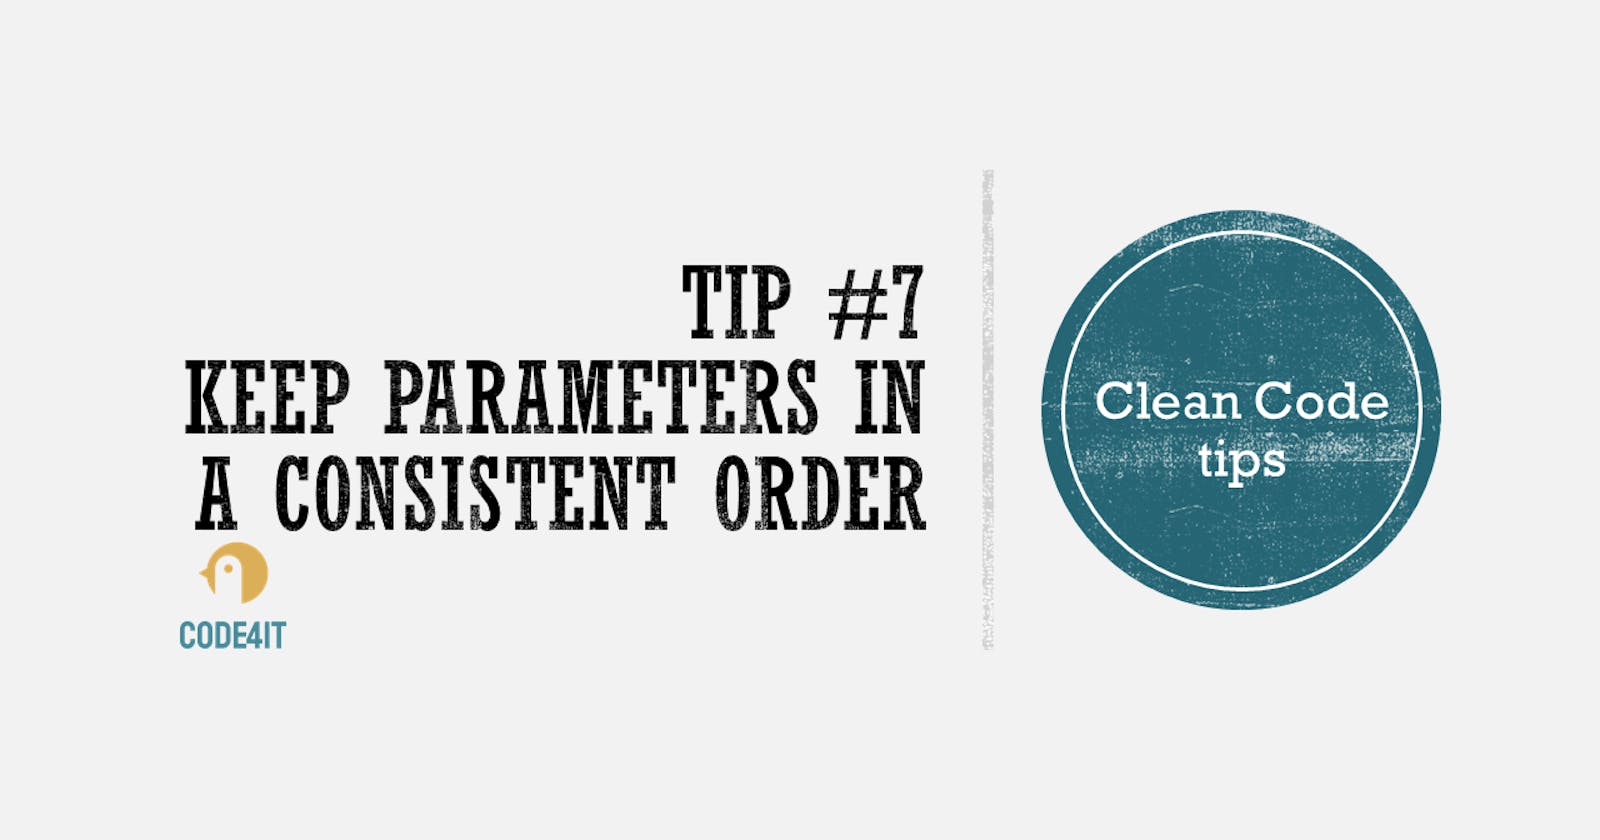 Clean Code Tip: Keep the parameters in a consistent order